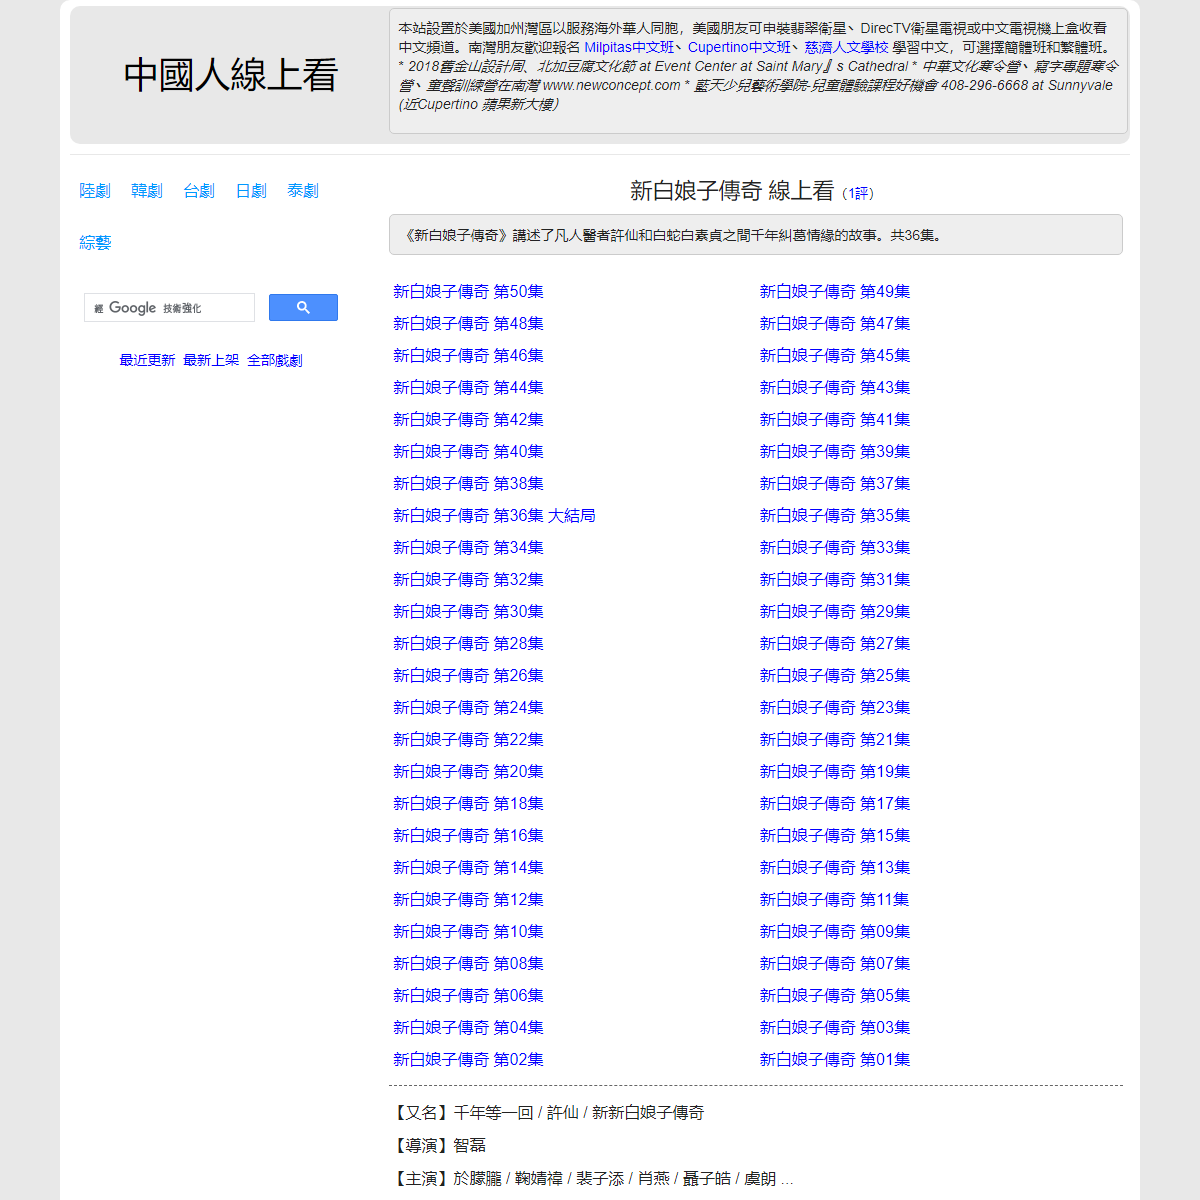 A complete backup of https://chinaq.tv/cn190403/